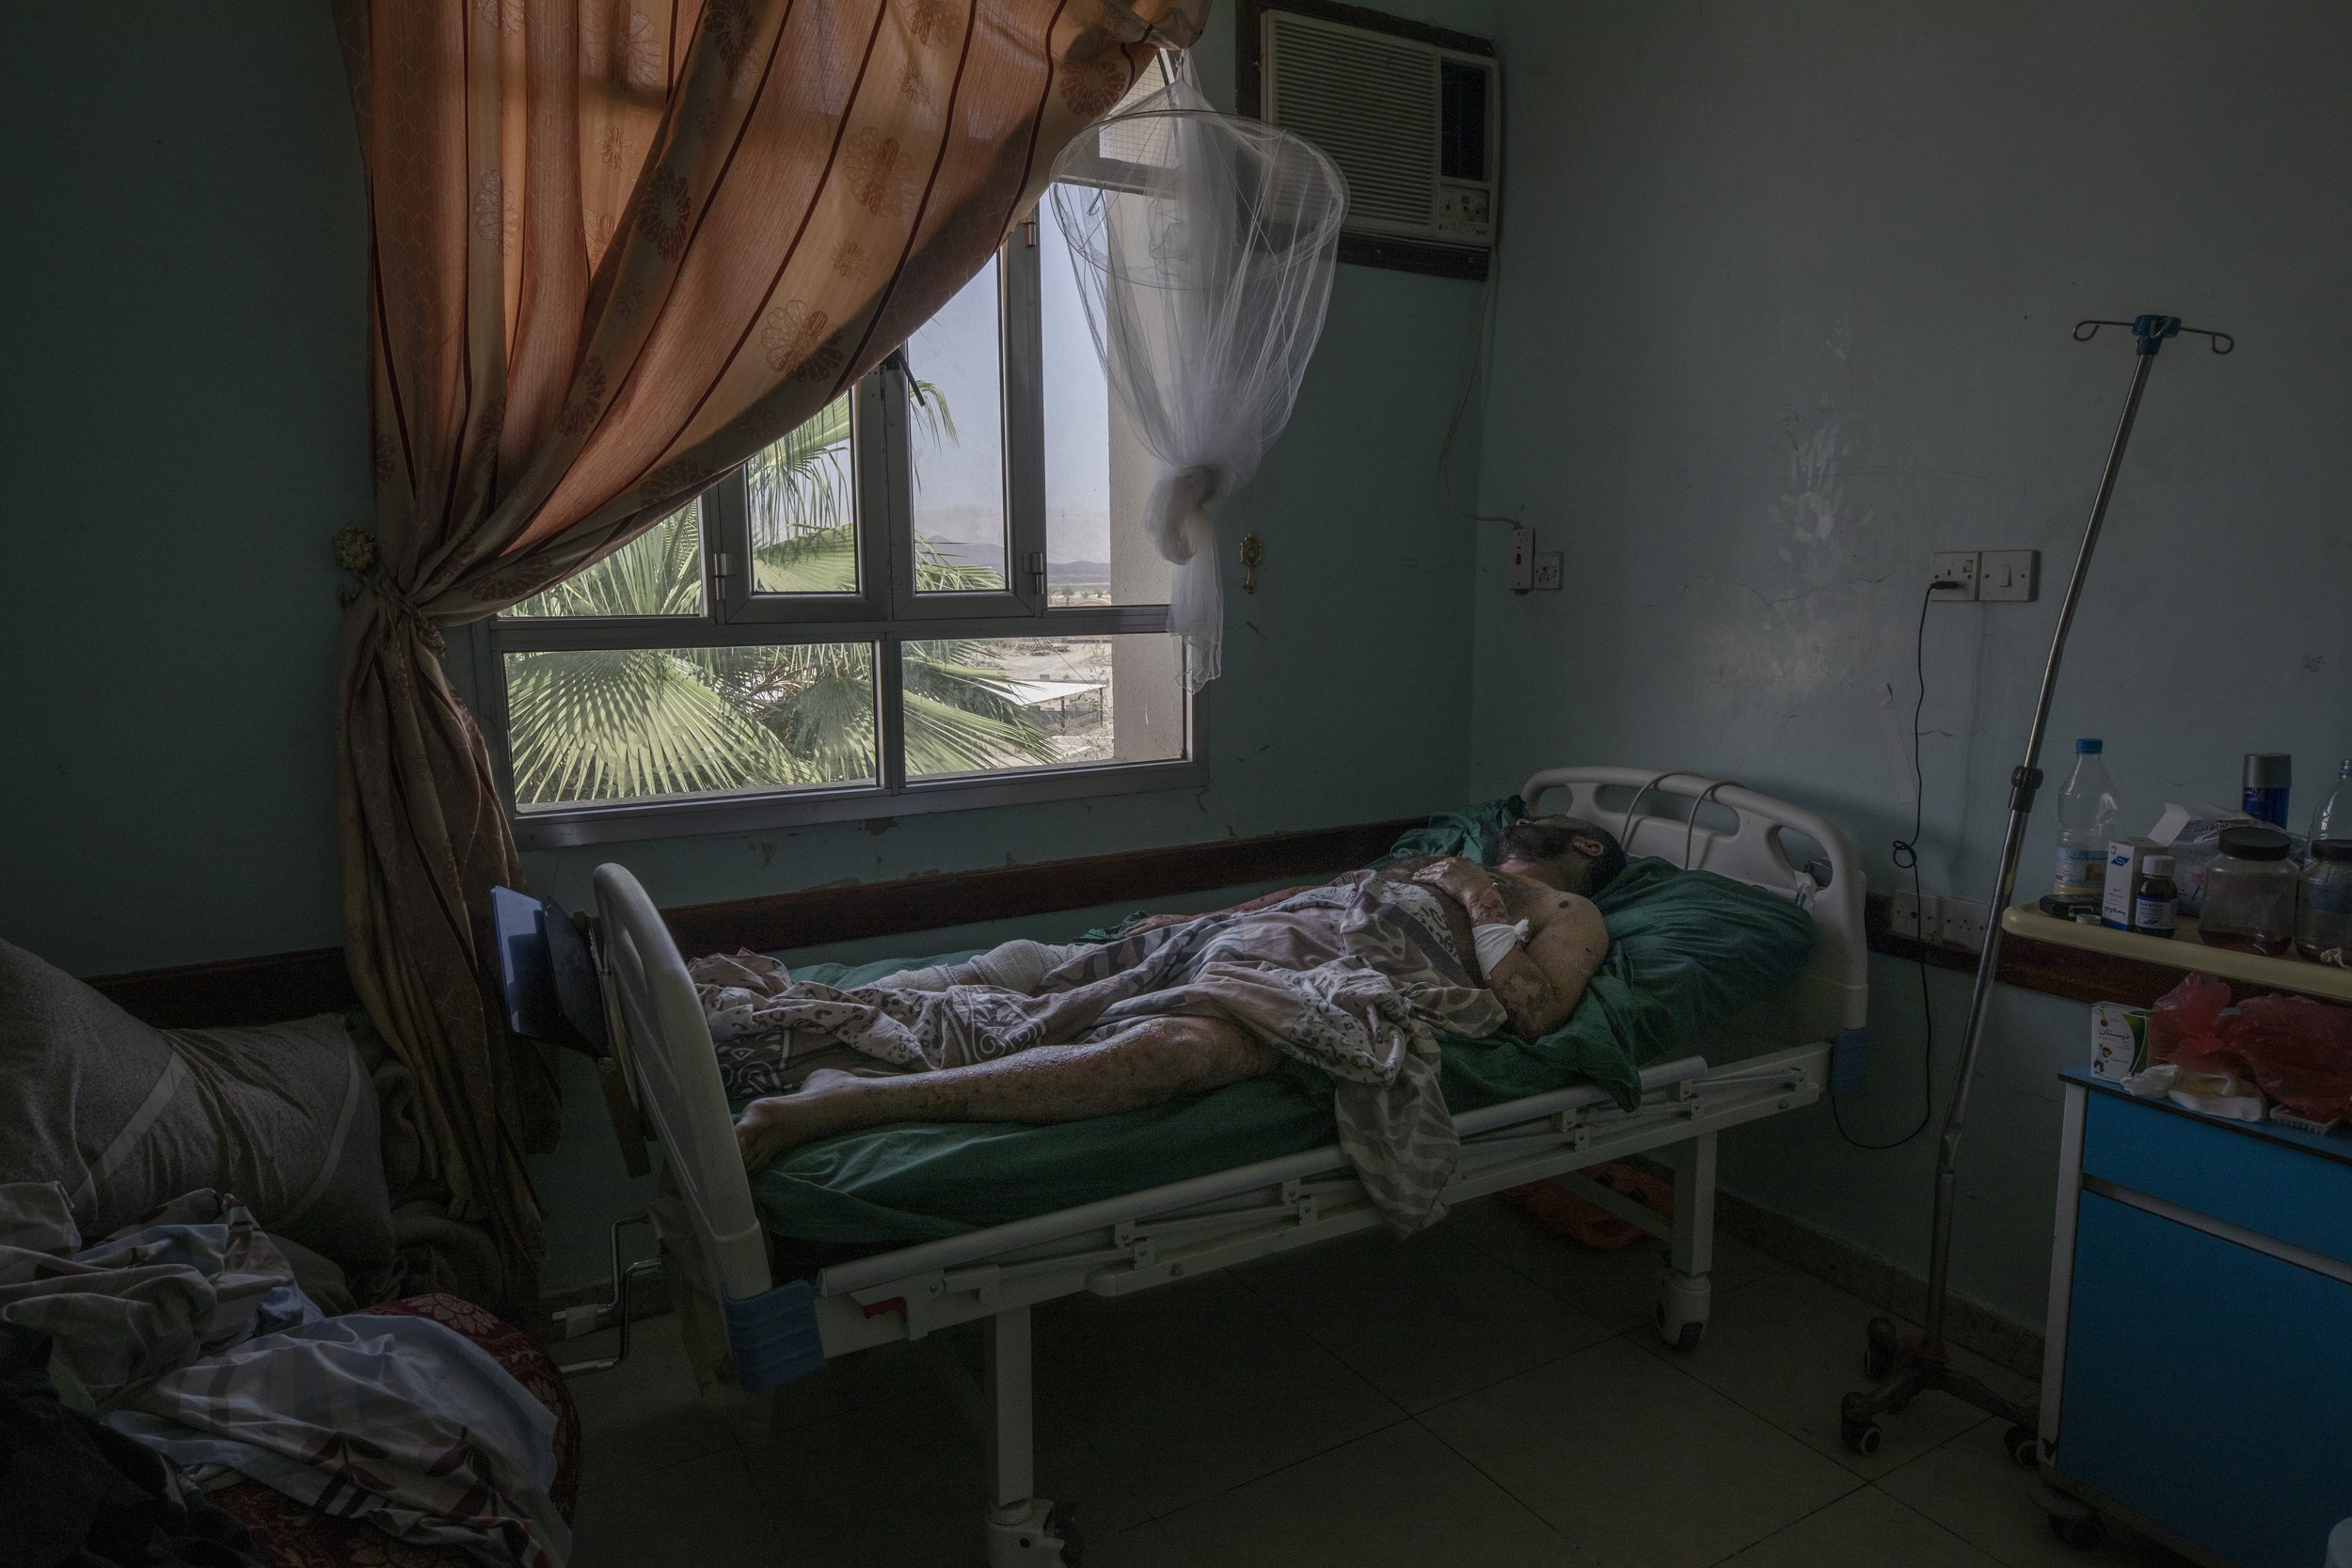  A Yemeni man who was severely injured when a ballistic missile and an explosive-laden drone fired by Yemen's Houthi rebels hit a fuel station in the Rawdha neighborhood of Marib, Yemen, receives treatment at a hospital in Marib, on June 21, 2021. (A